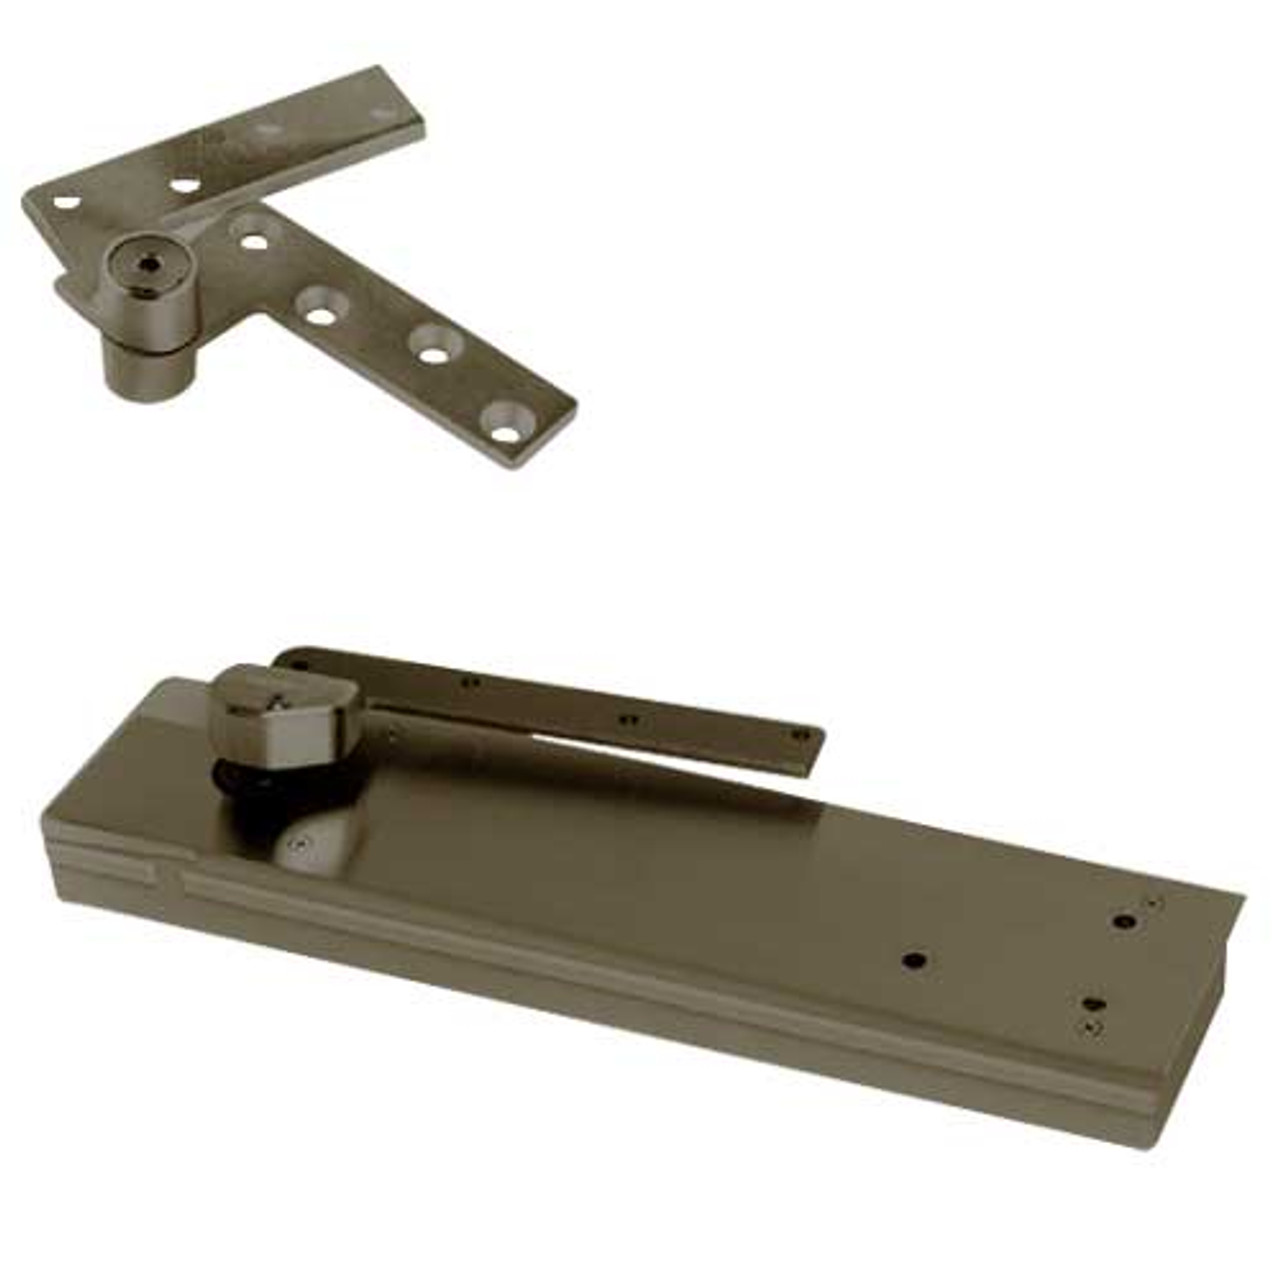 5104ABC180-1-1/2OS-LH-613 Rixson 51 Series 1-1/2" Offset Hung Shallow Depth Floor Closers in Dark Bronze Finish